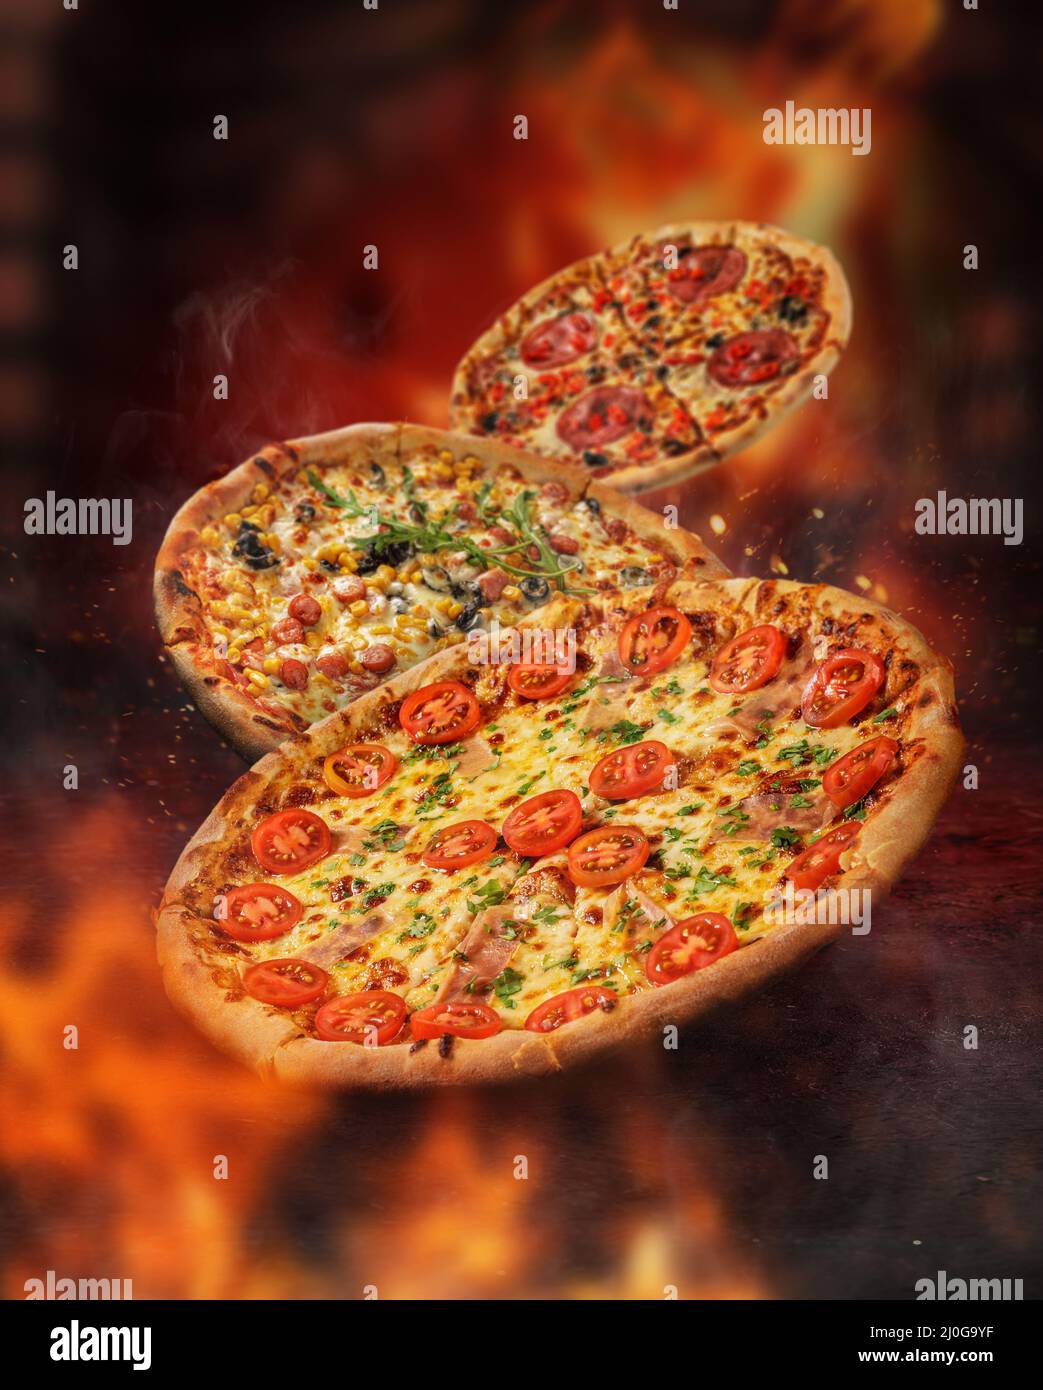 Pizza levitated in front of a burning oven. surrounded by flames Stock Photo